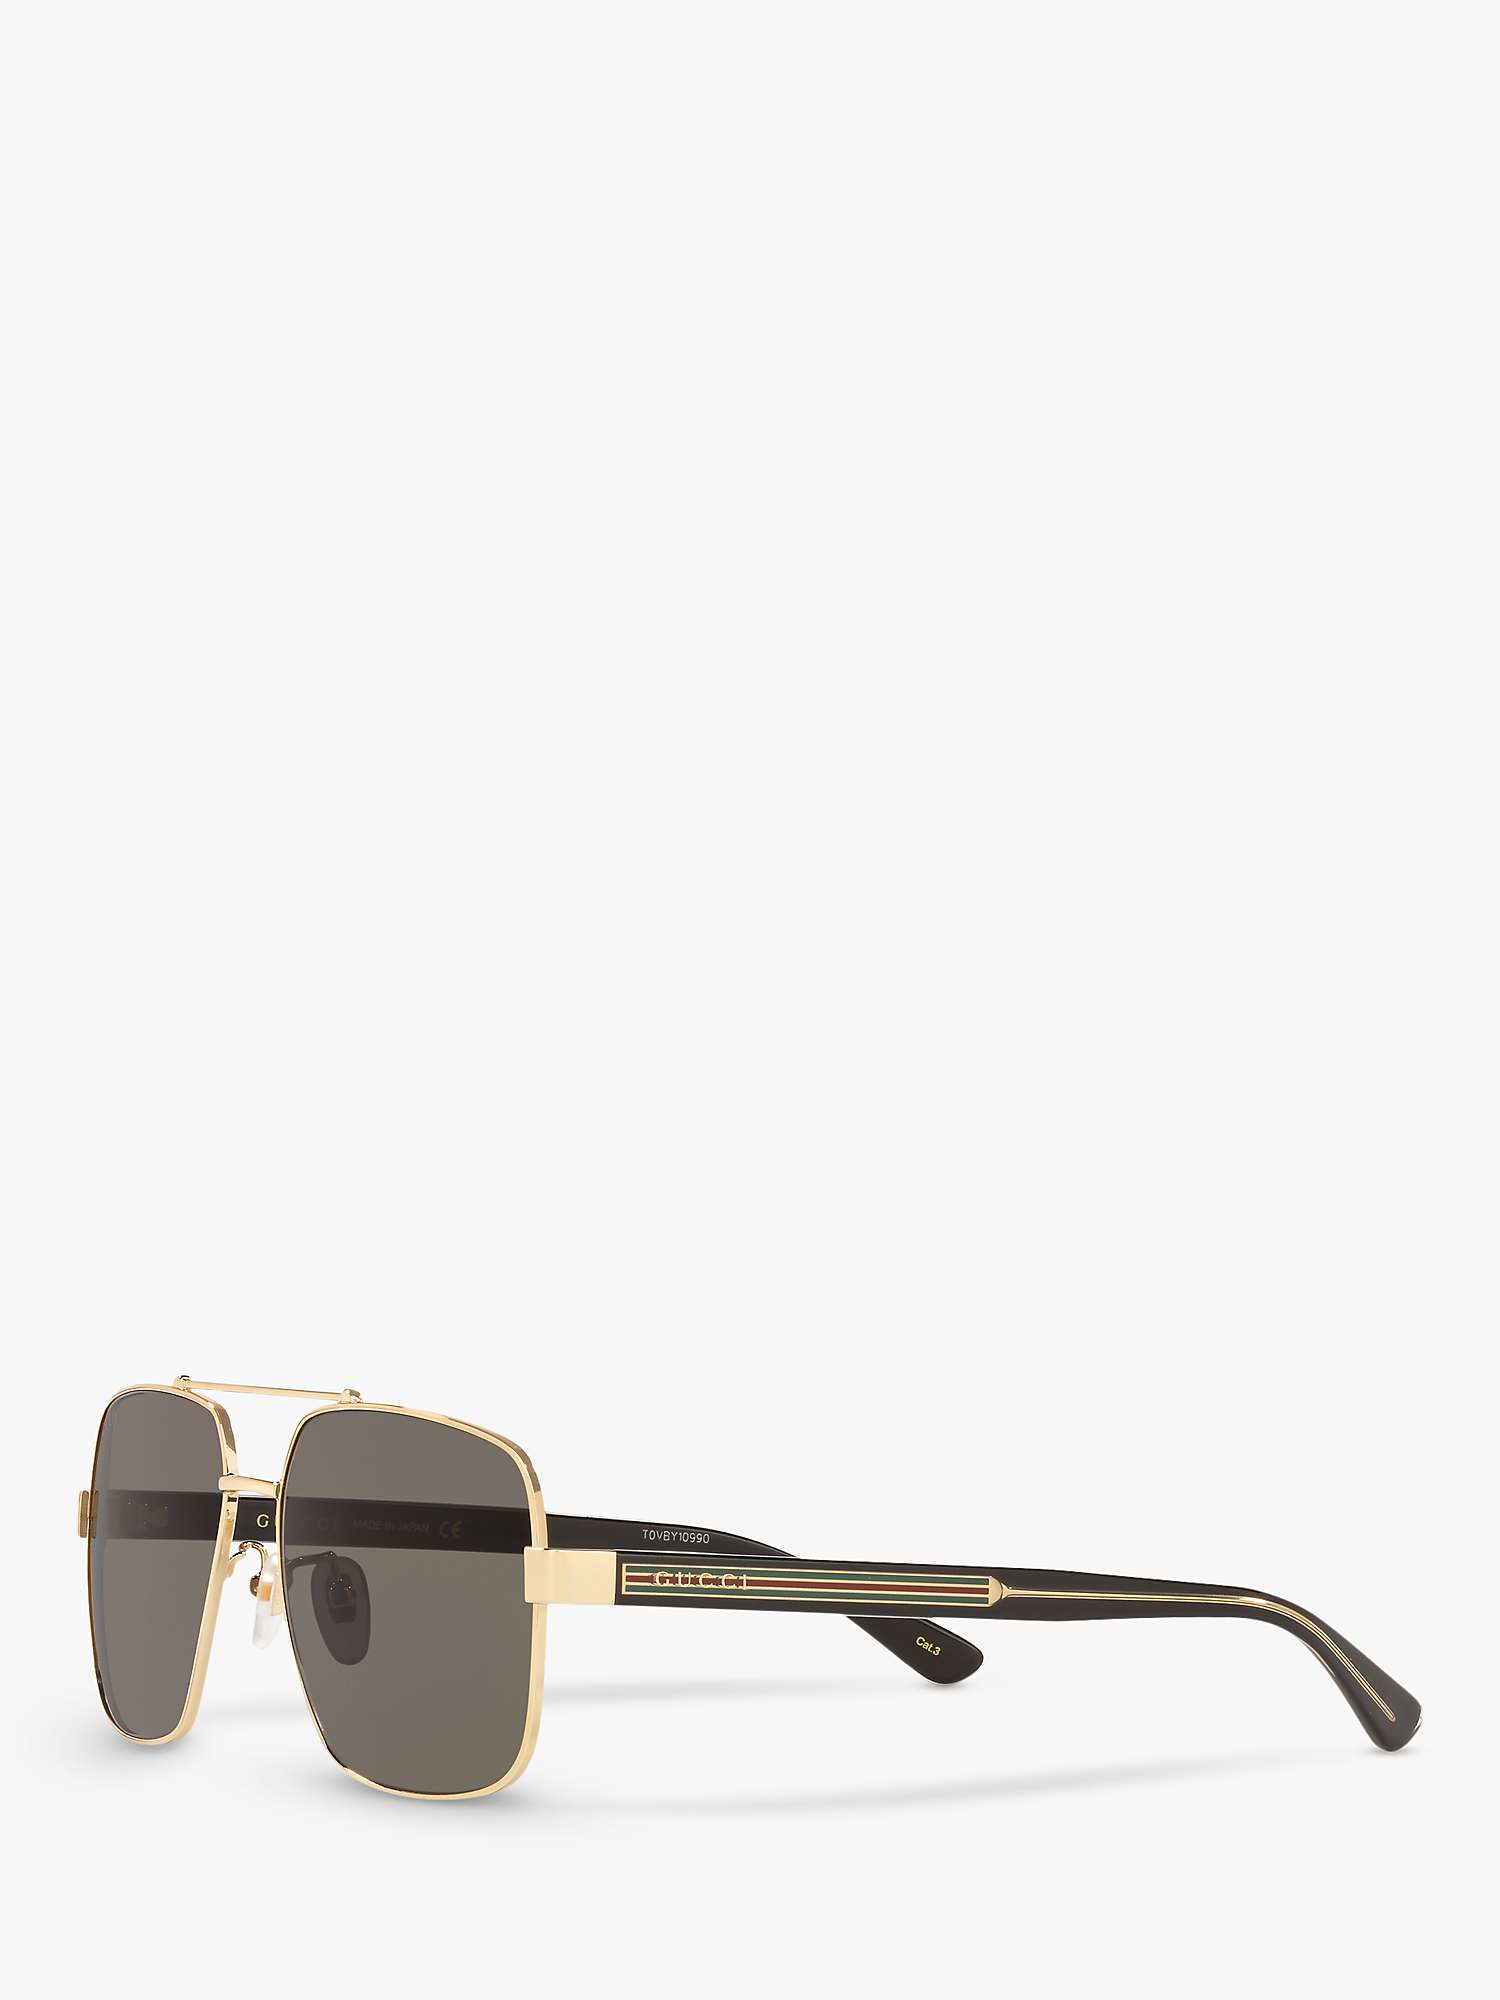 Gucci GG0529S Men's Square Sunglasses, Gold/Grey at John Lewis & Partners